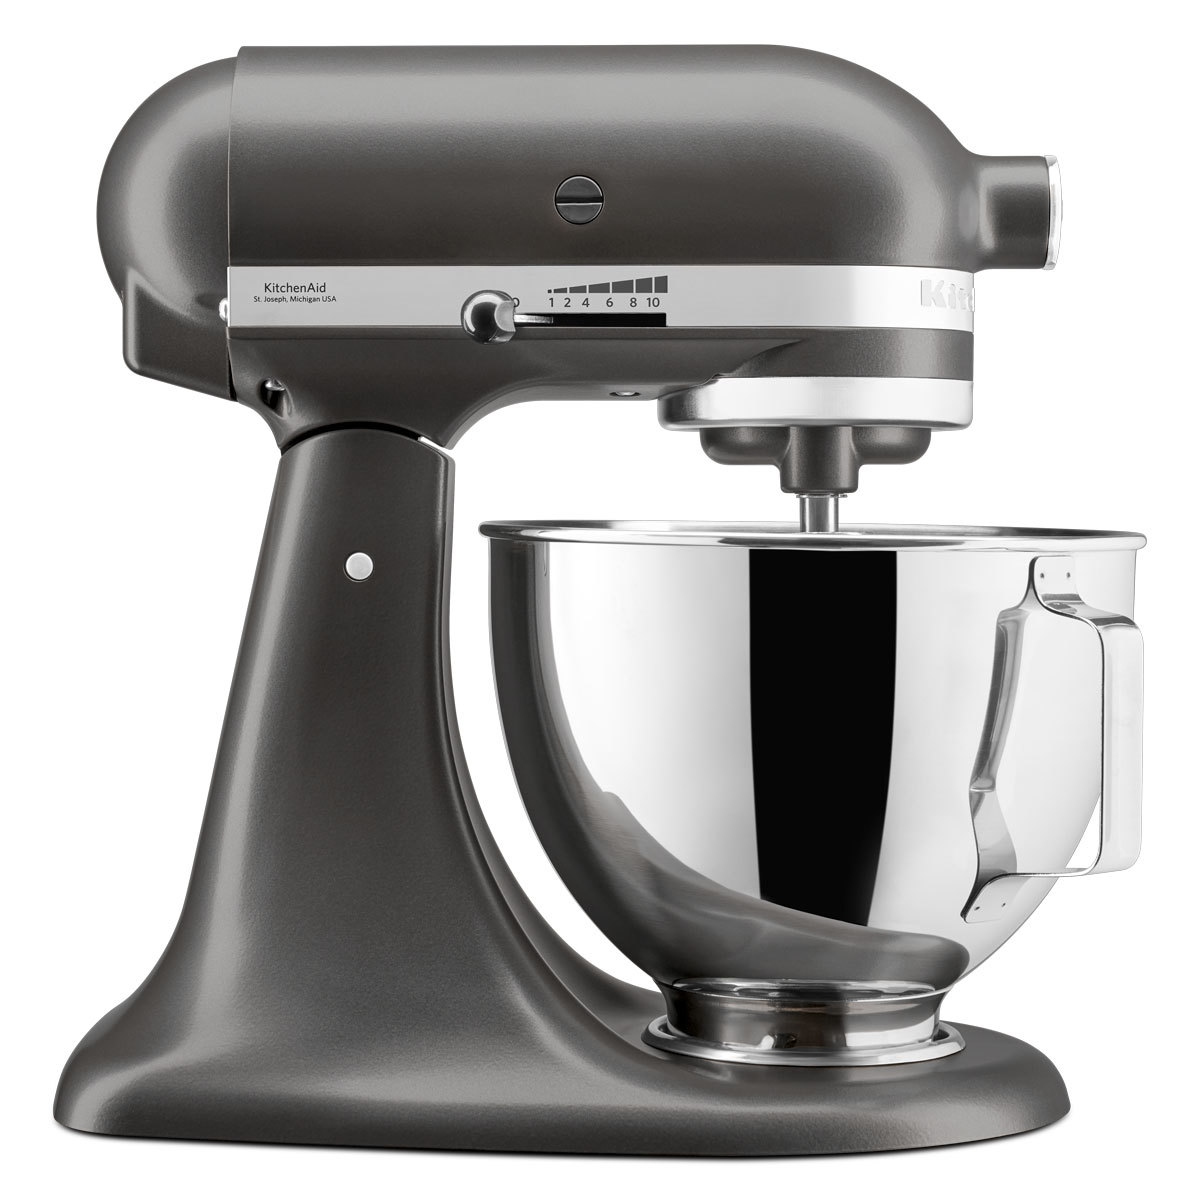 Kitchenaid 4 3l Stand Mixer With Pouring Shield In Slate 5ksm95psbsz Costco Uk